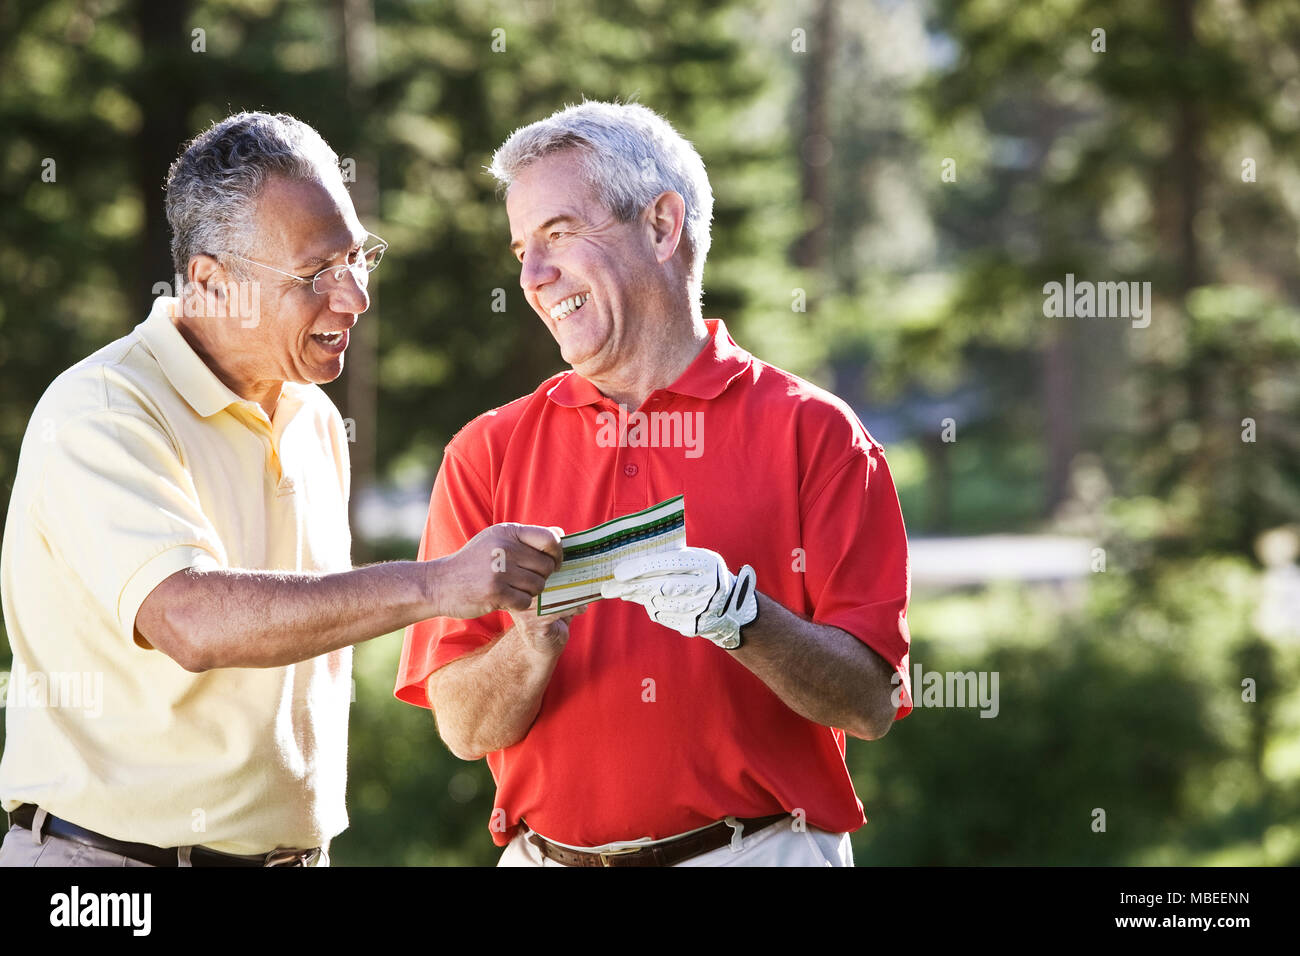 Two senior friends laughing about a golf score on a local golf course. Stock Photo